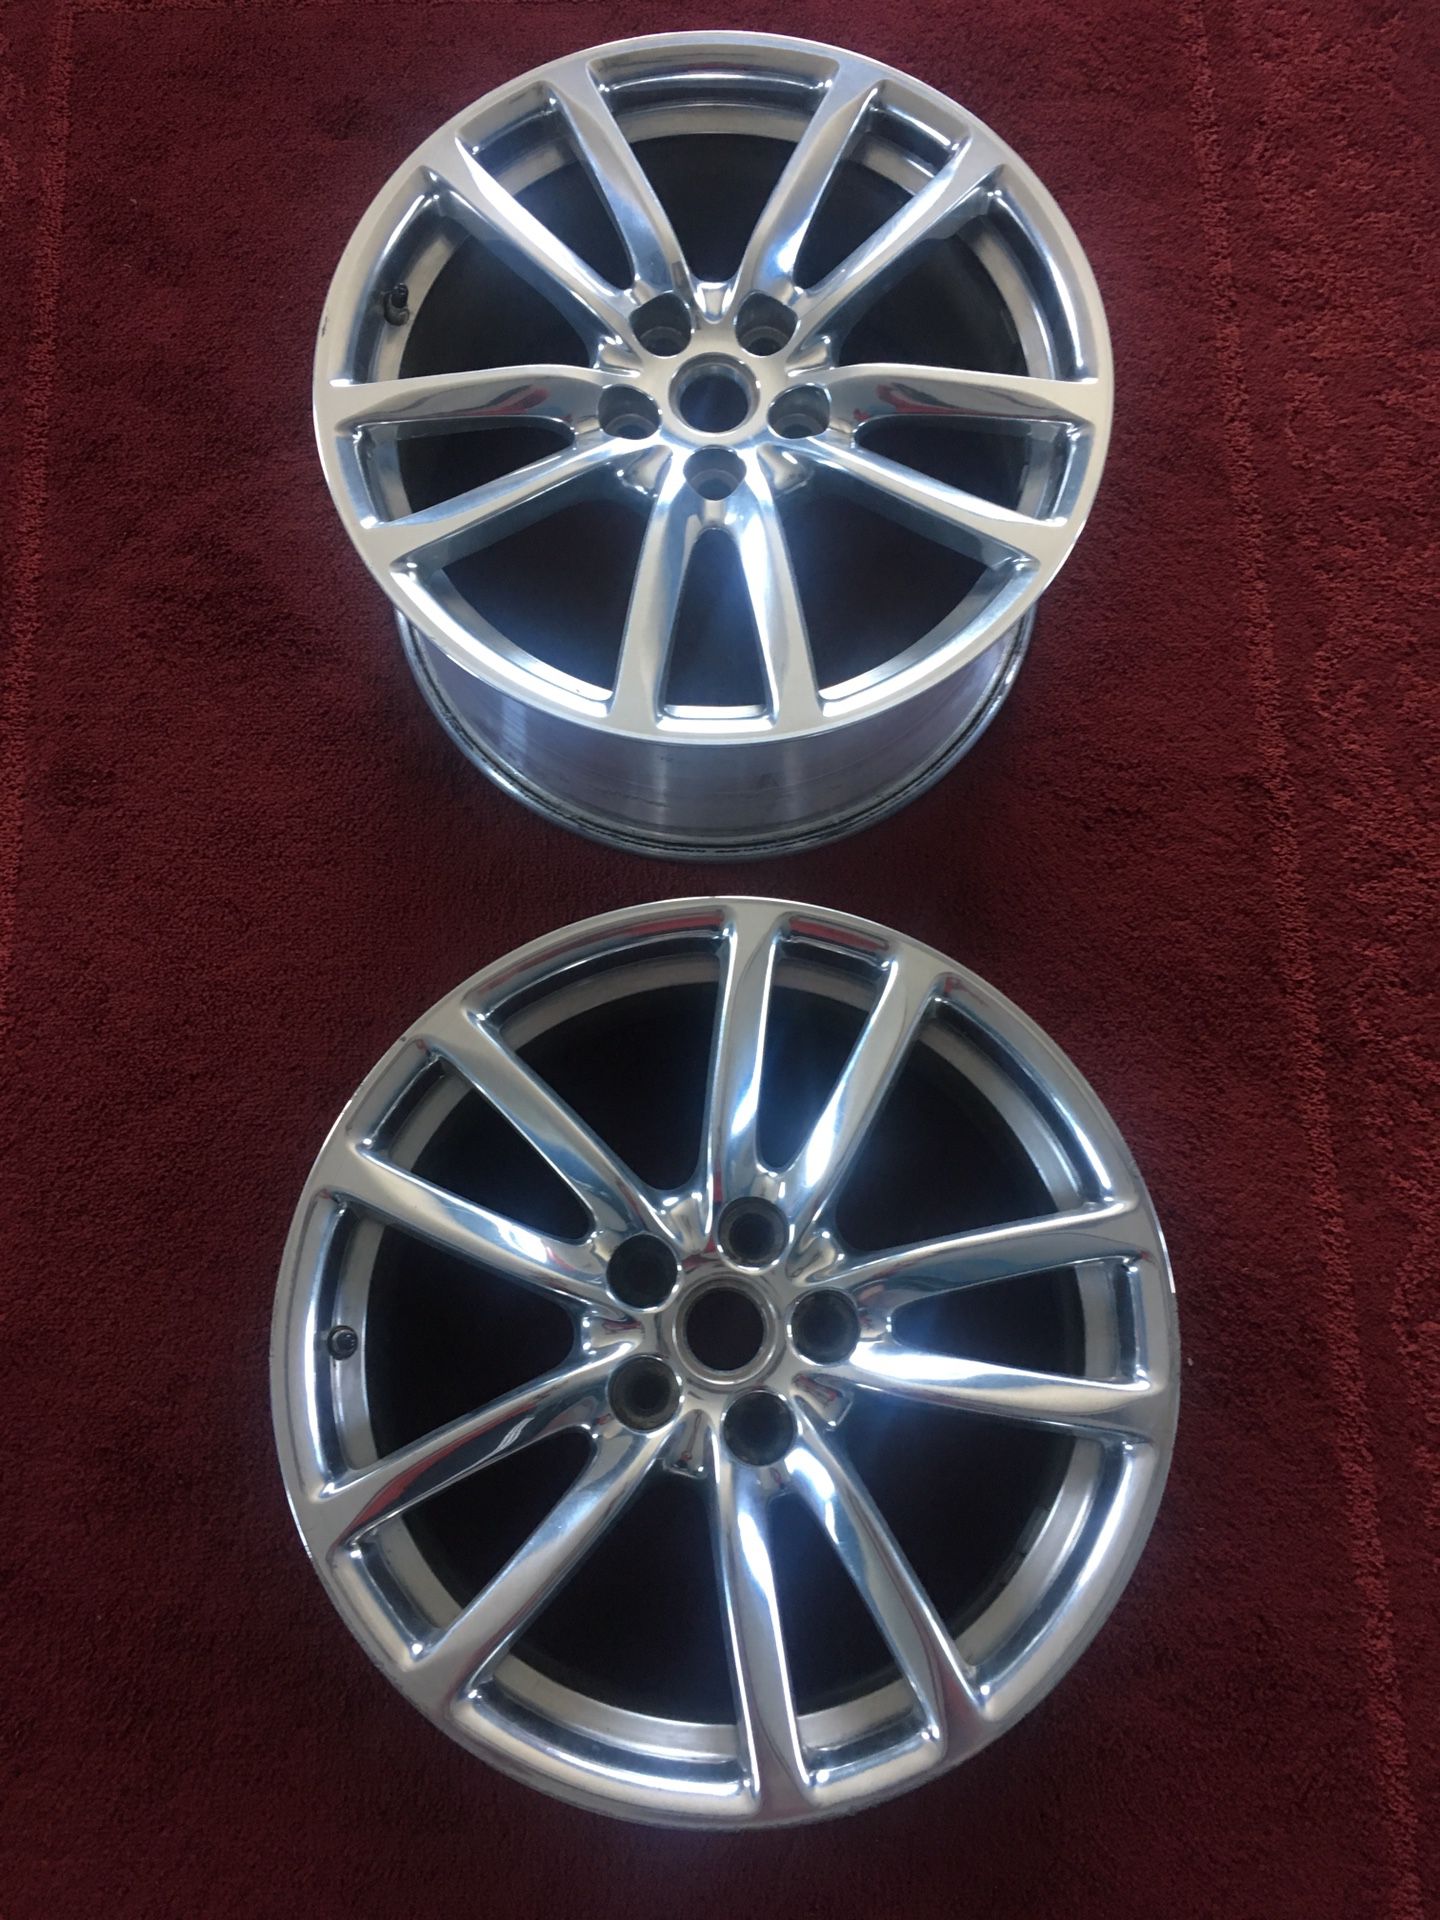 2014 Chevy SS Rims